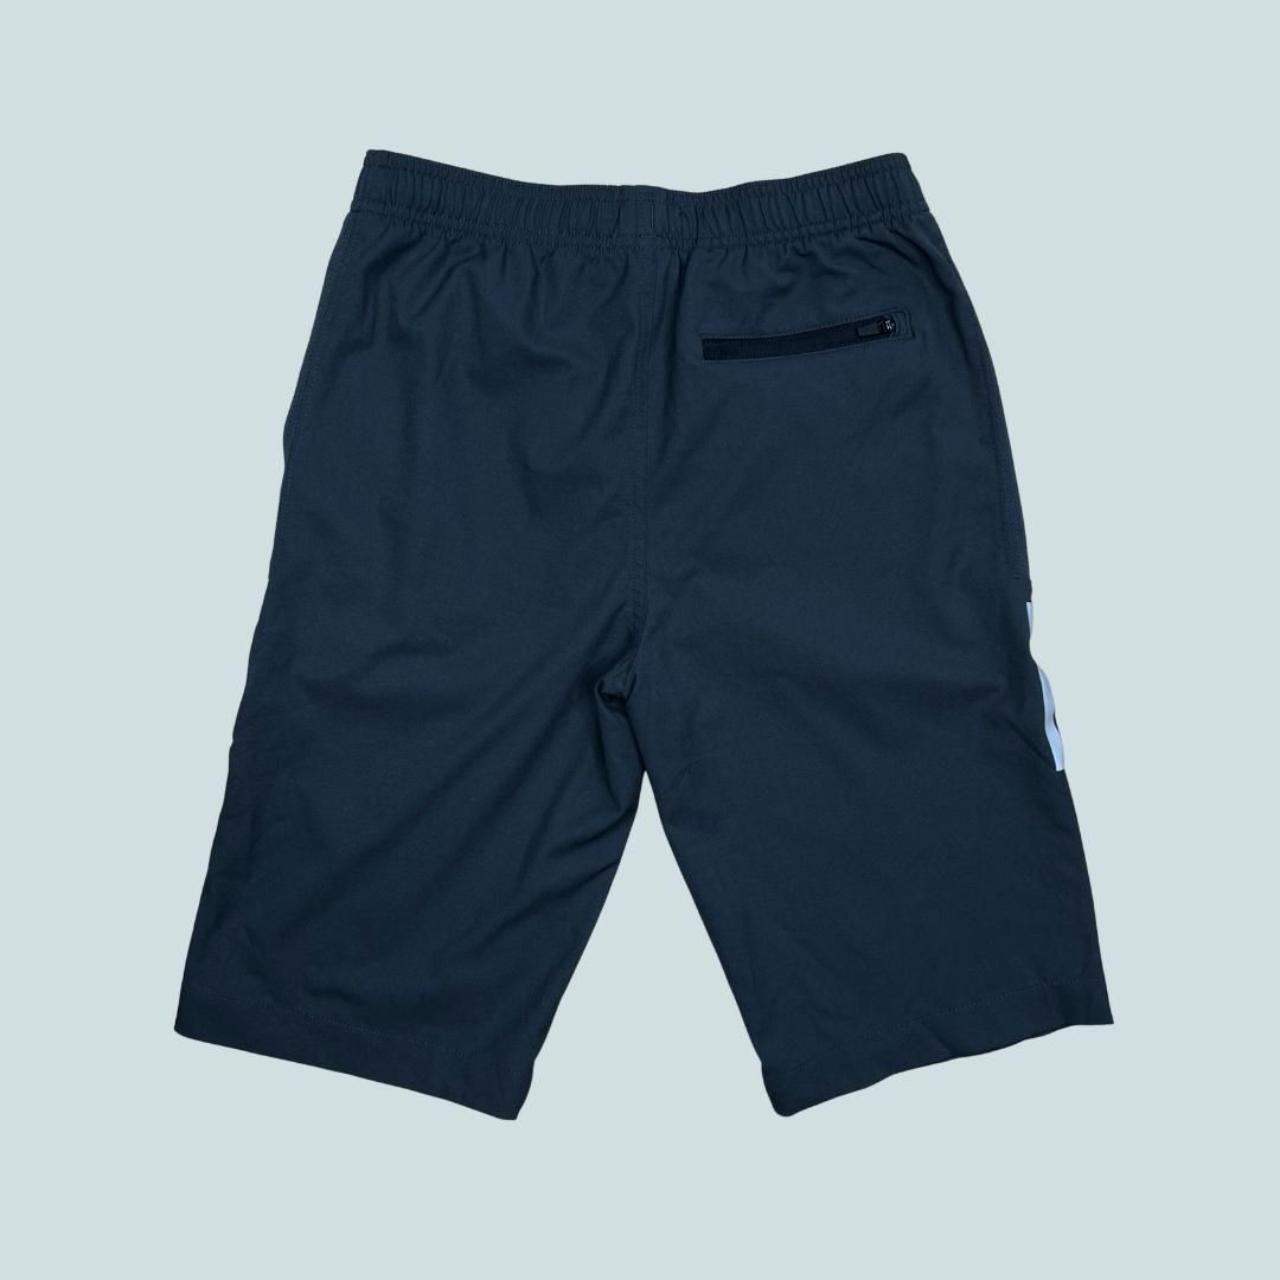 Product Image 4 - MSX BY MICHAEL STRAHAN SHORTS

Please